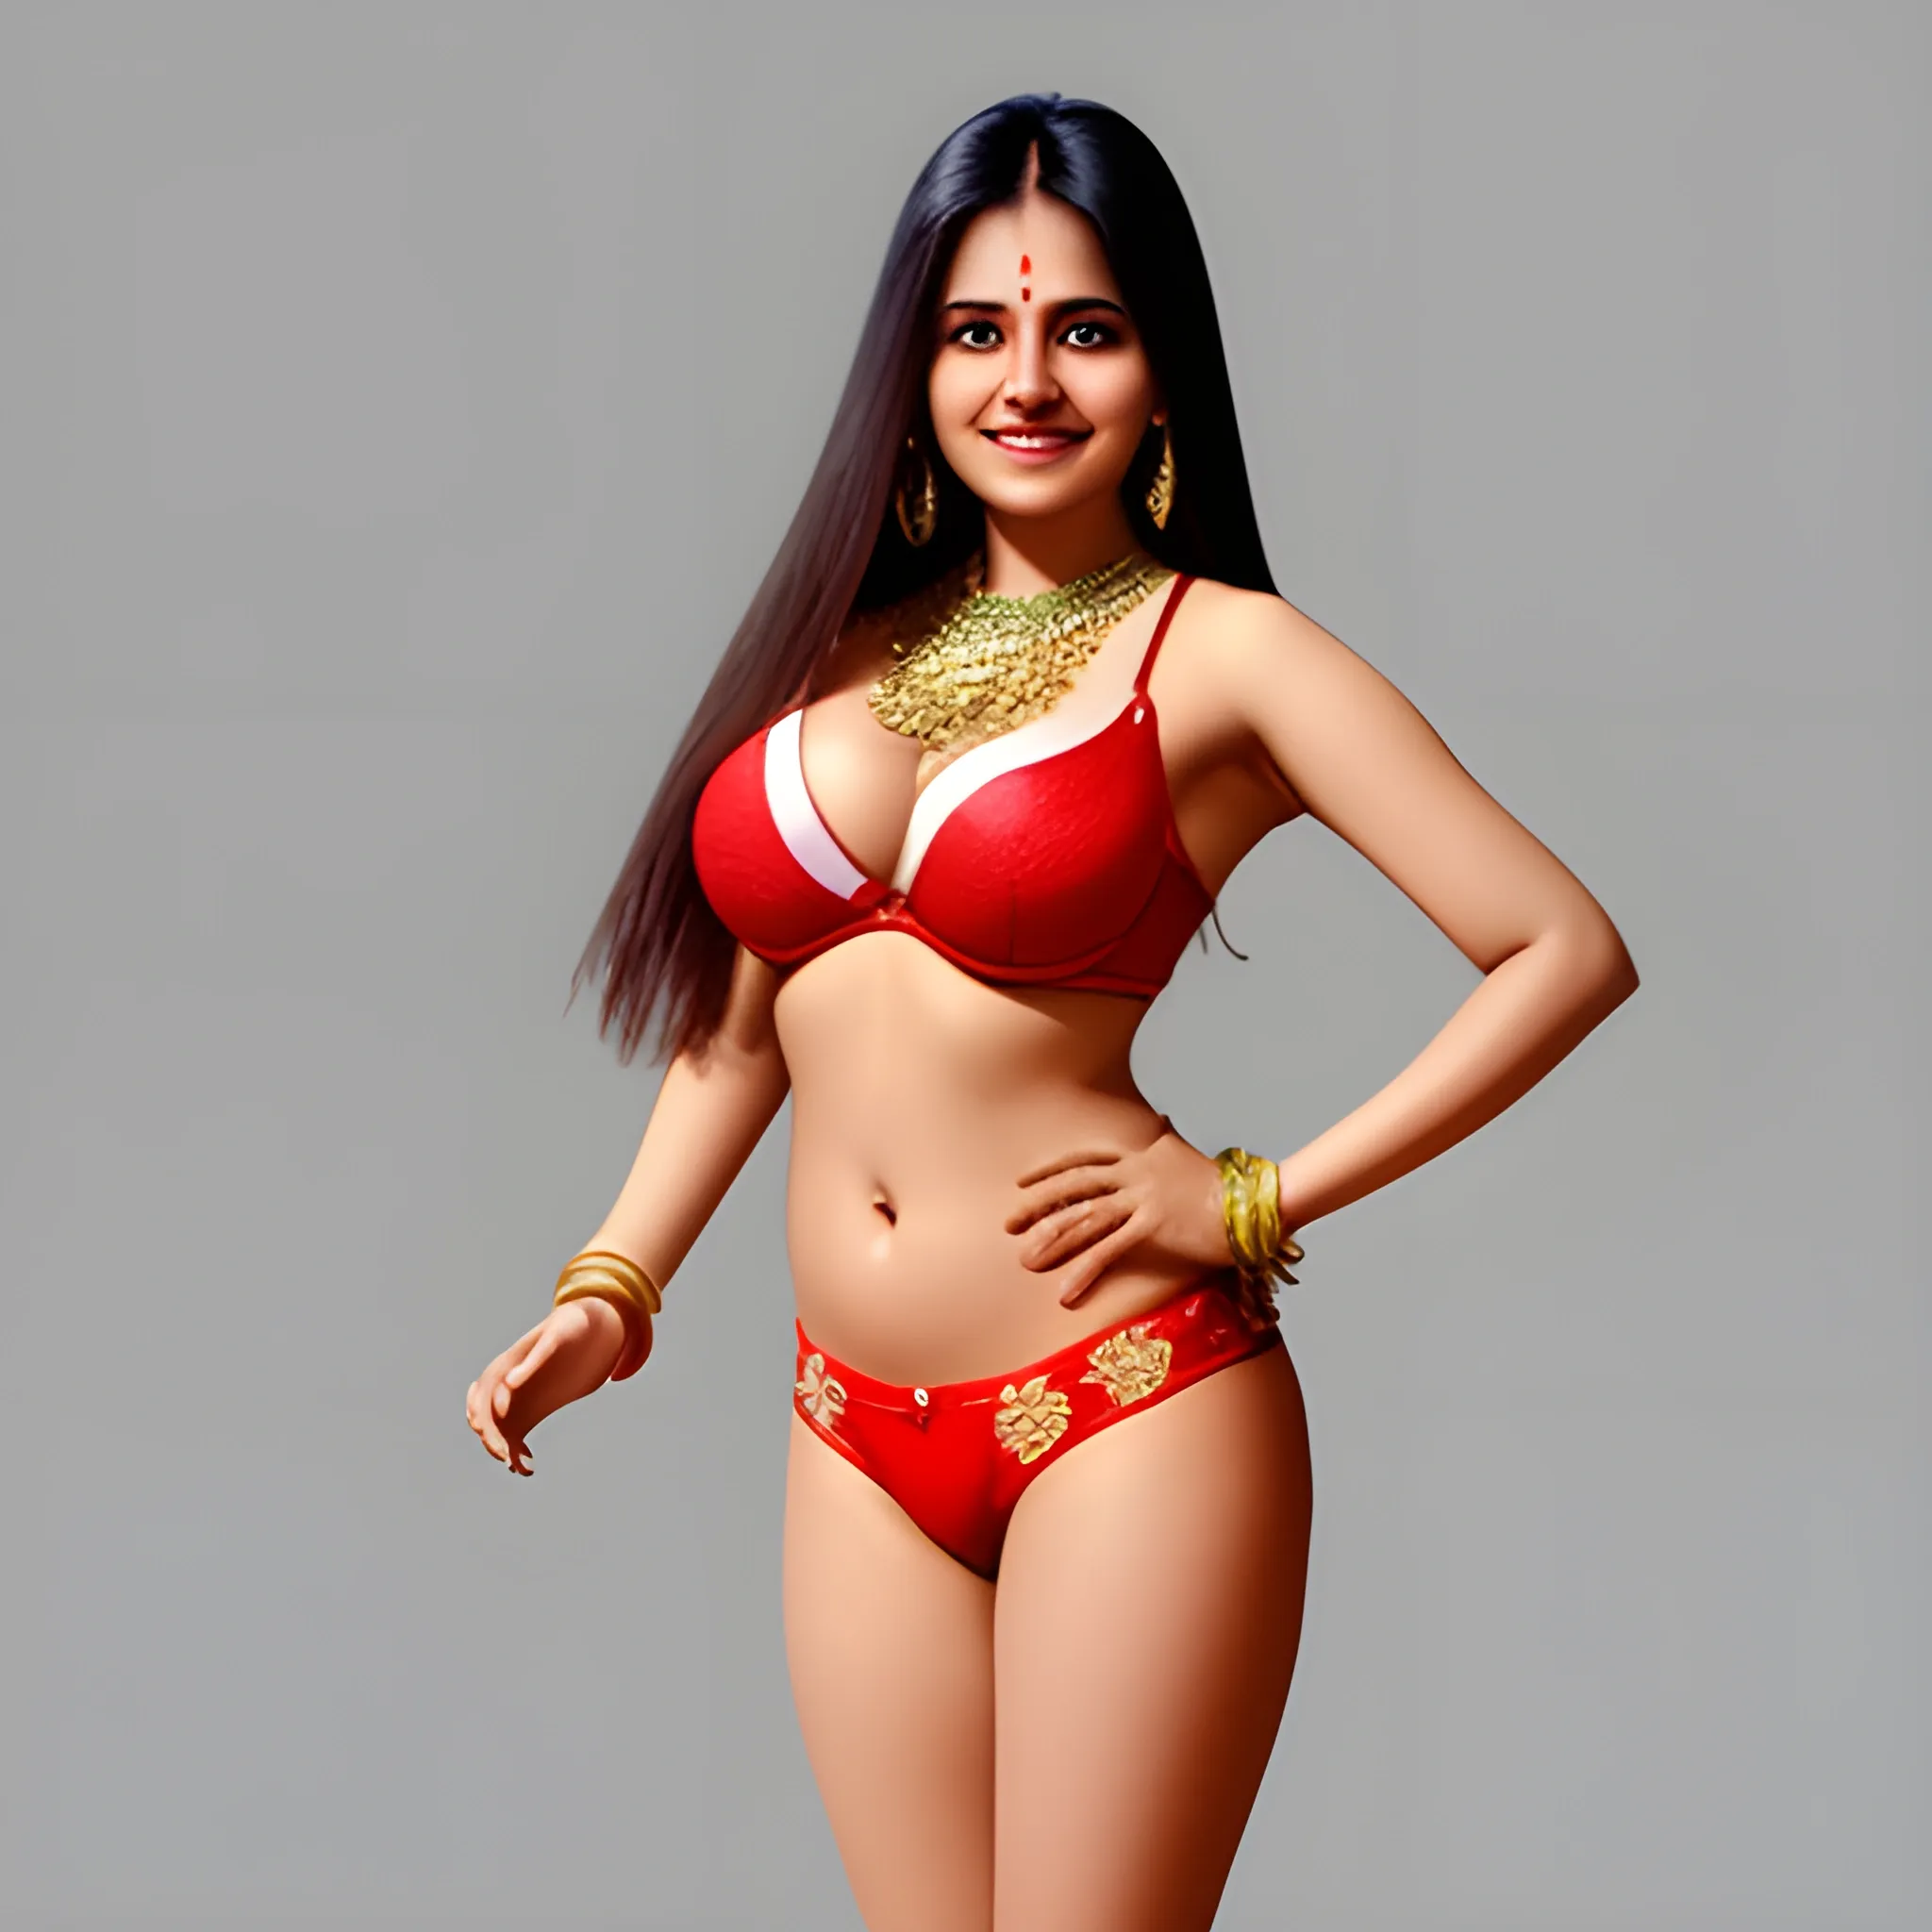 Ashritha's huge sizes with Visible bra lines : r/indiantwins